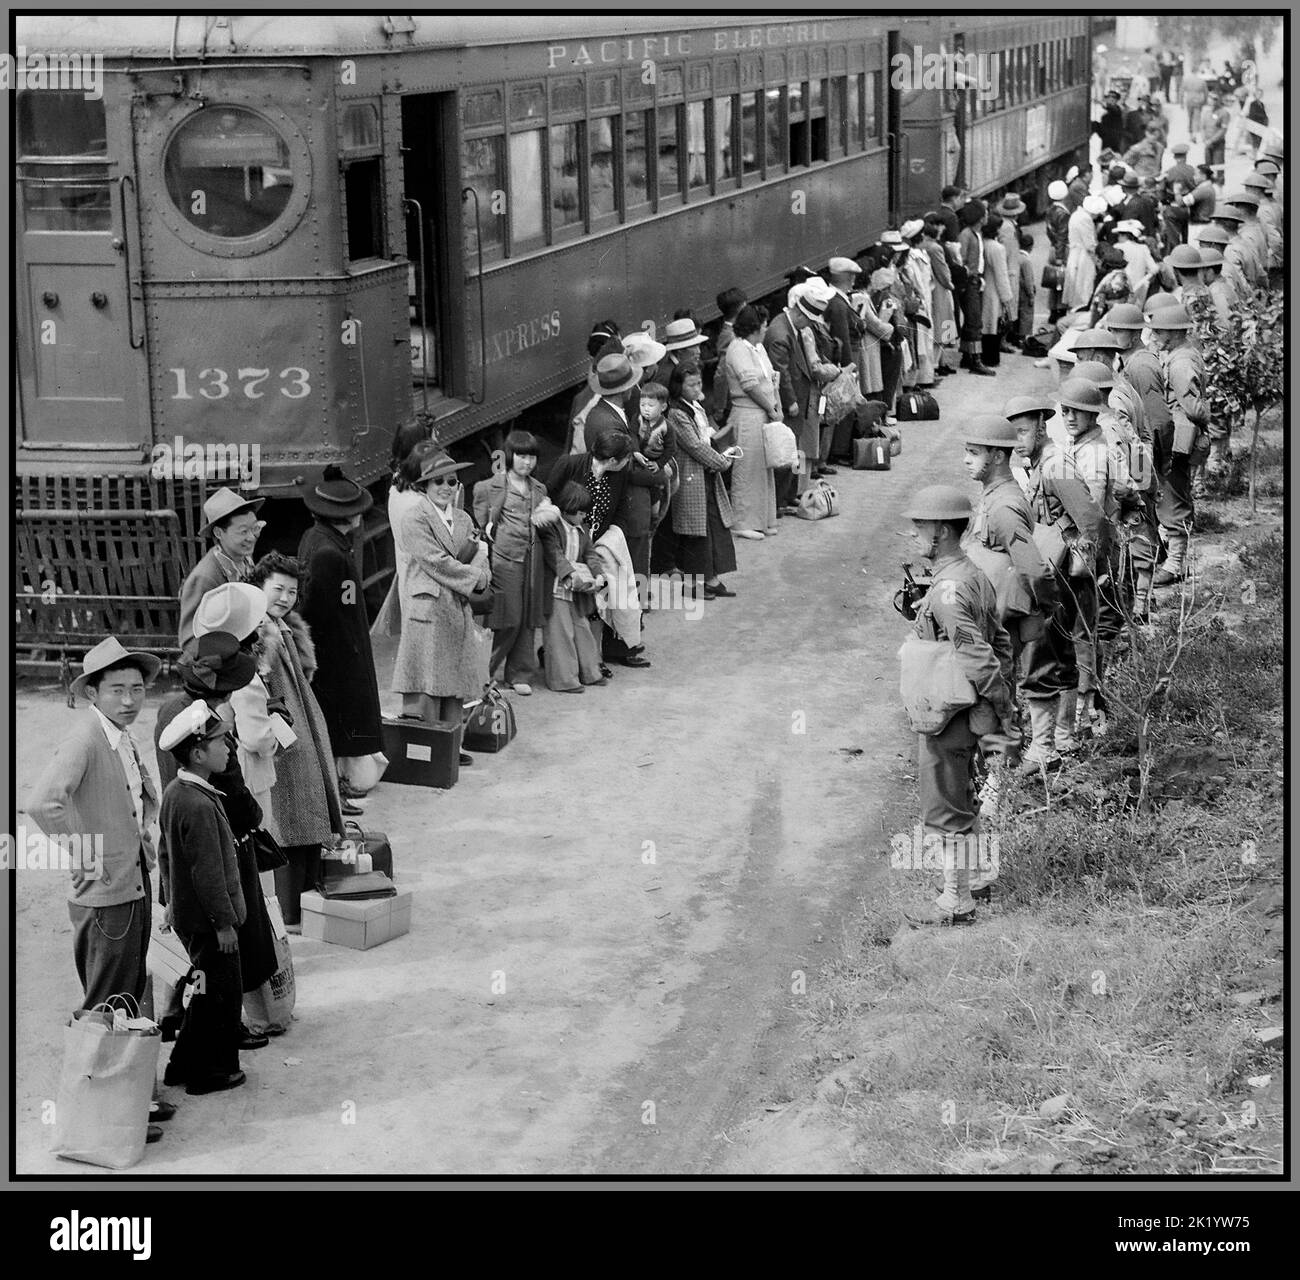 WW2 Japanese citizens evacuees in the USA Arcadia, California. Propaganda image of persons of Japanese ancestry arrive at the Santa Anita Assembly center from San Pedro, California. Evacuees lived at this center at the Santa Anita race track before being moved inland to relocation centers. Date5 April 1942 Stock Photo